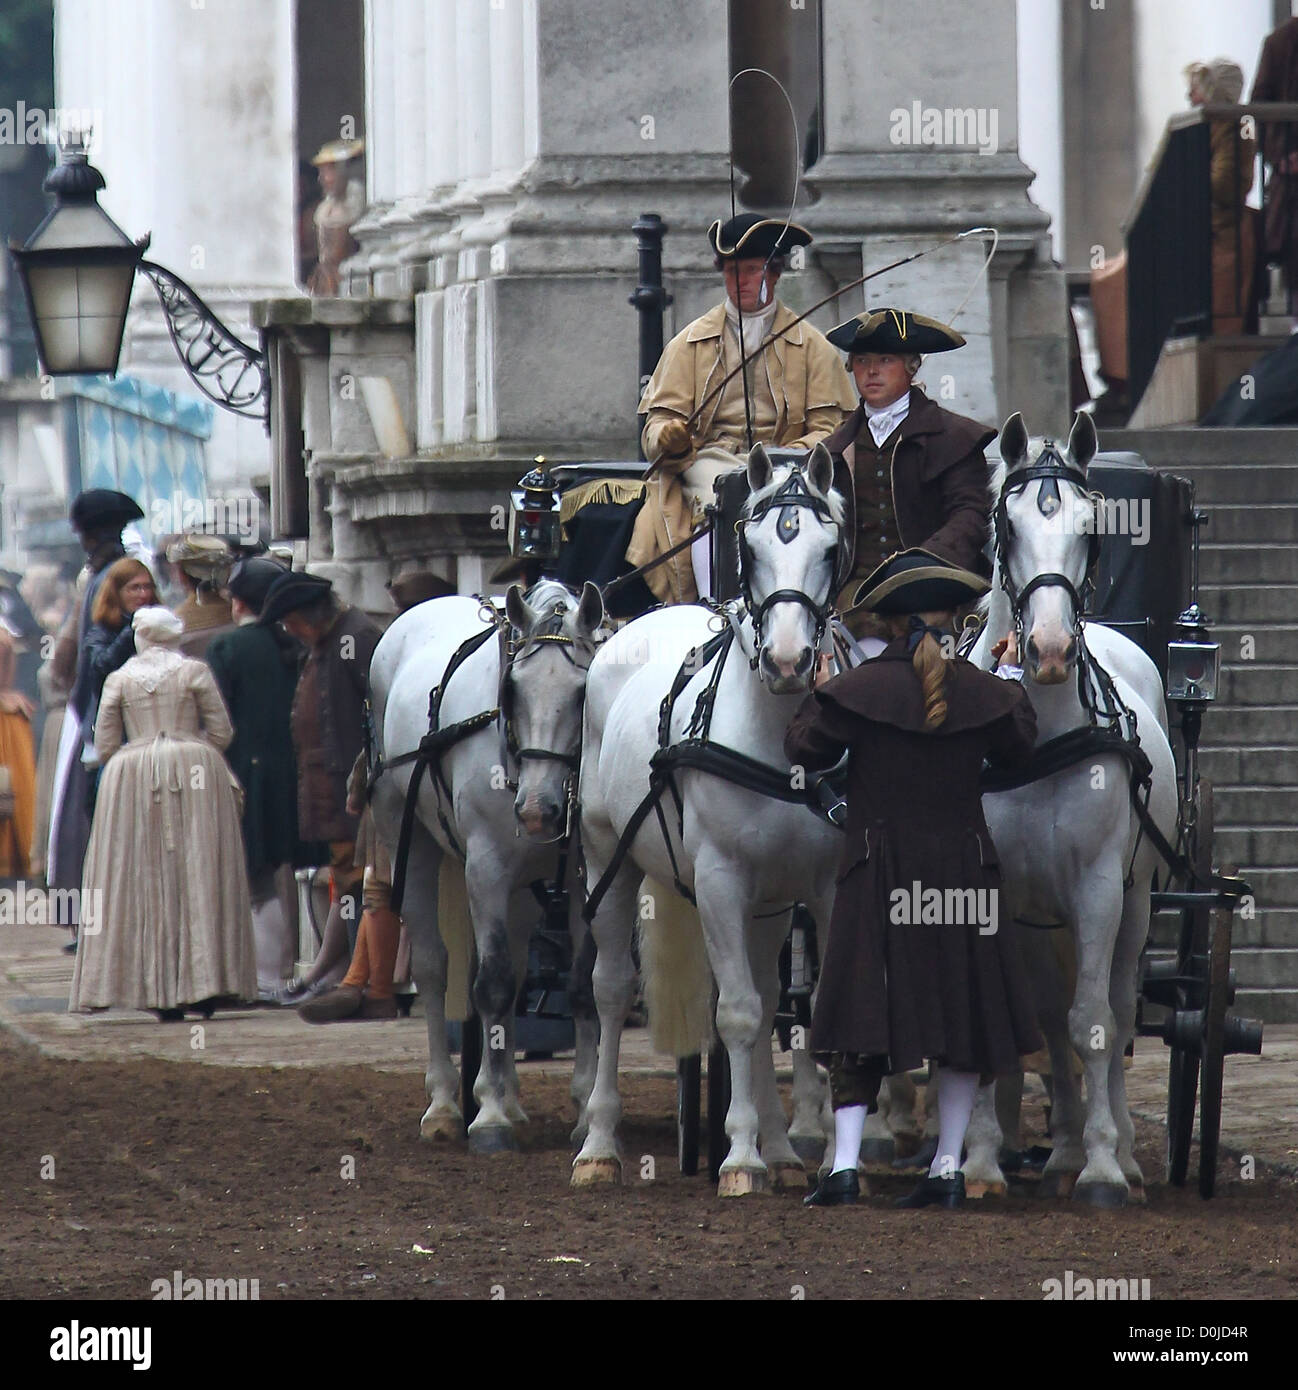 Albums 102+ Images pirates of the caribbean on stranger tides filming location Updated